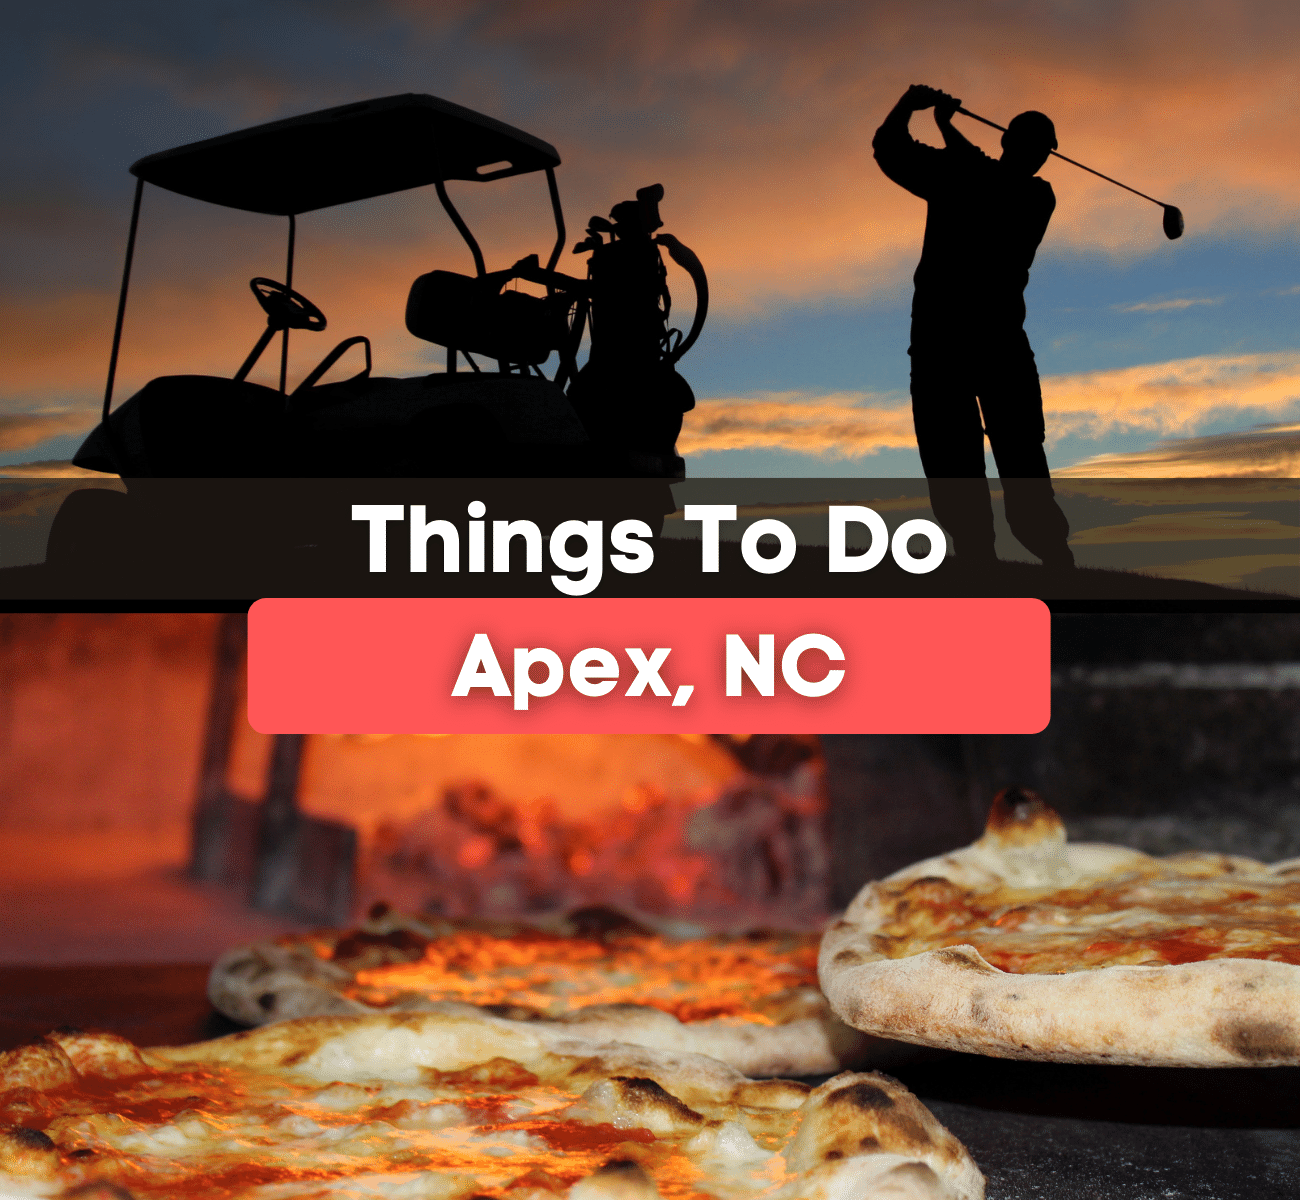 11 Unique Things To Do in Apex, NC